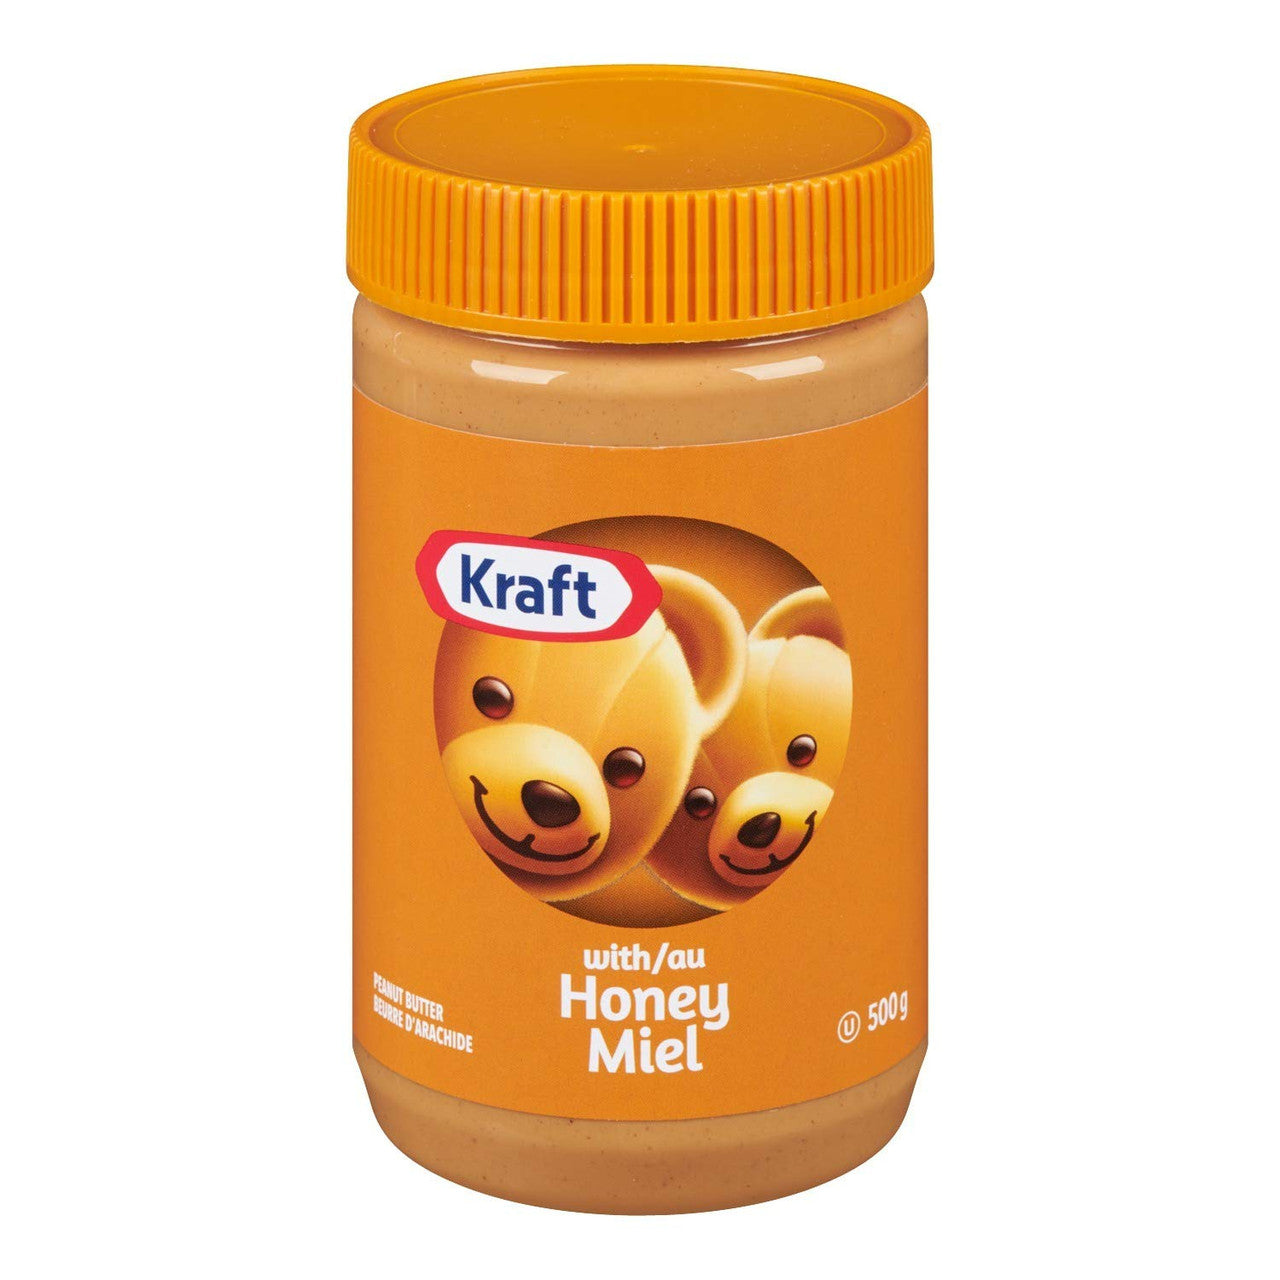 Kraft Peanut Butter with Honey, 500g/17.6oz., {Imported from Canada}